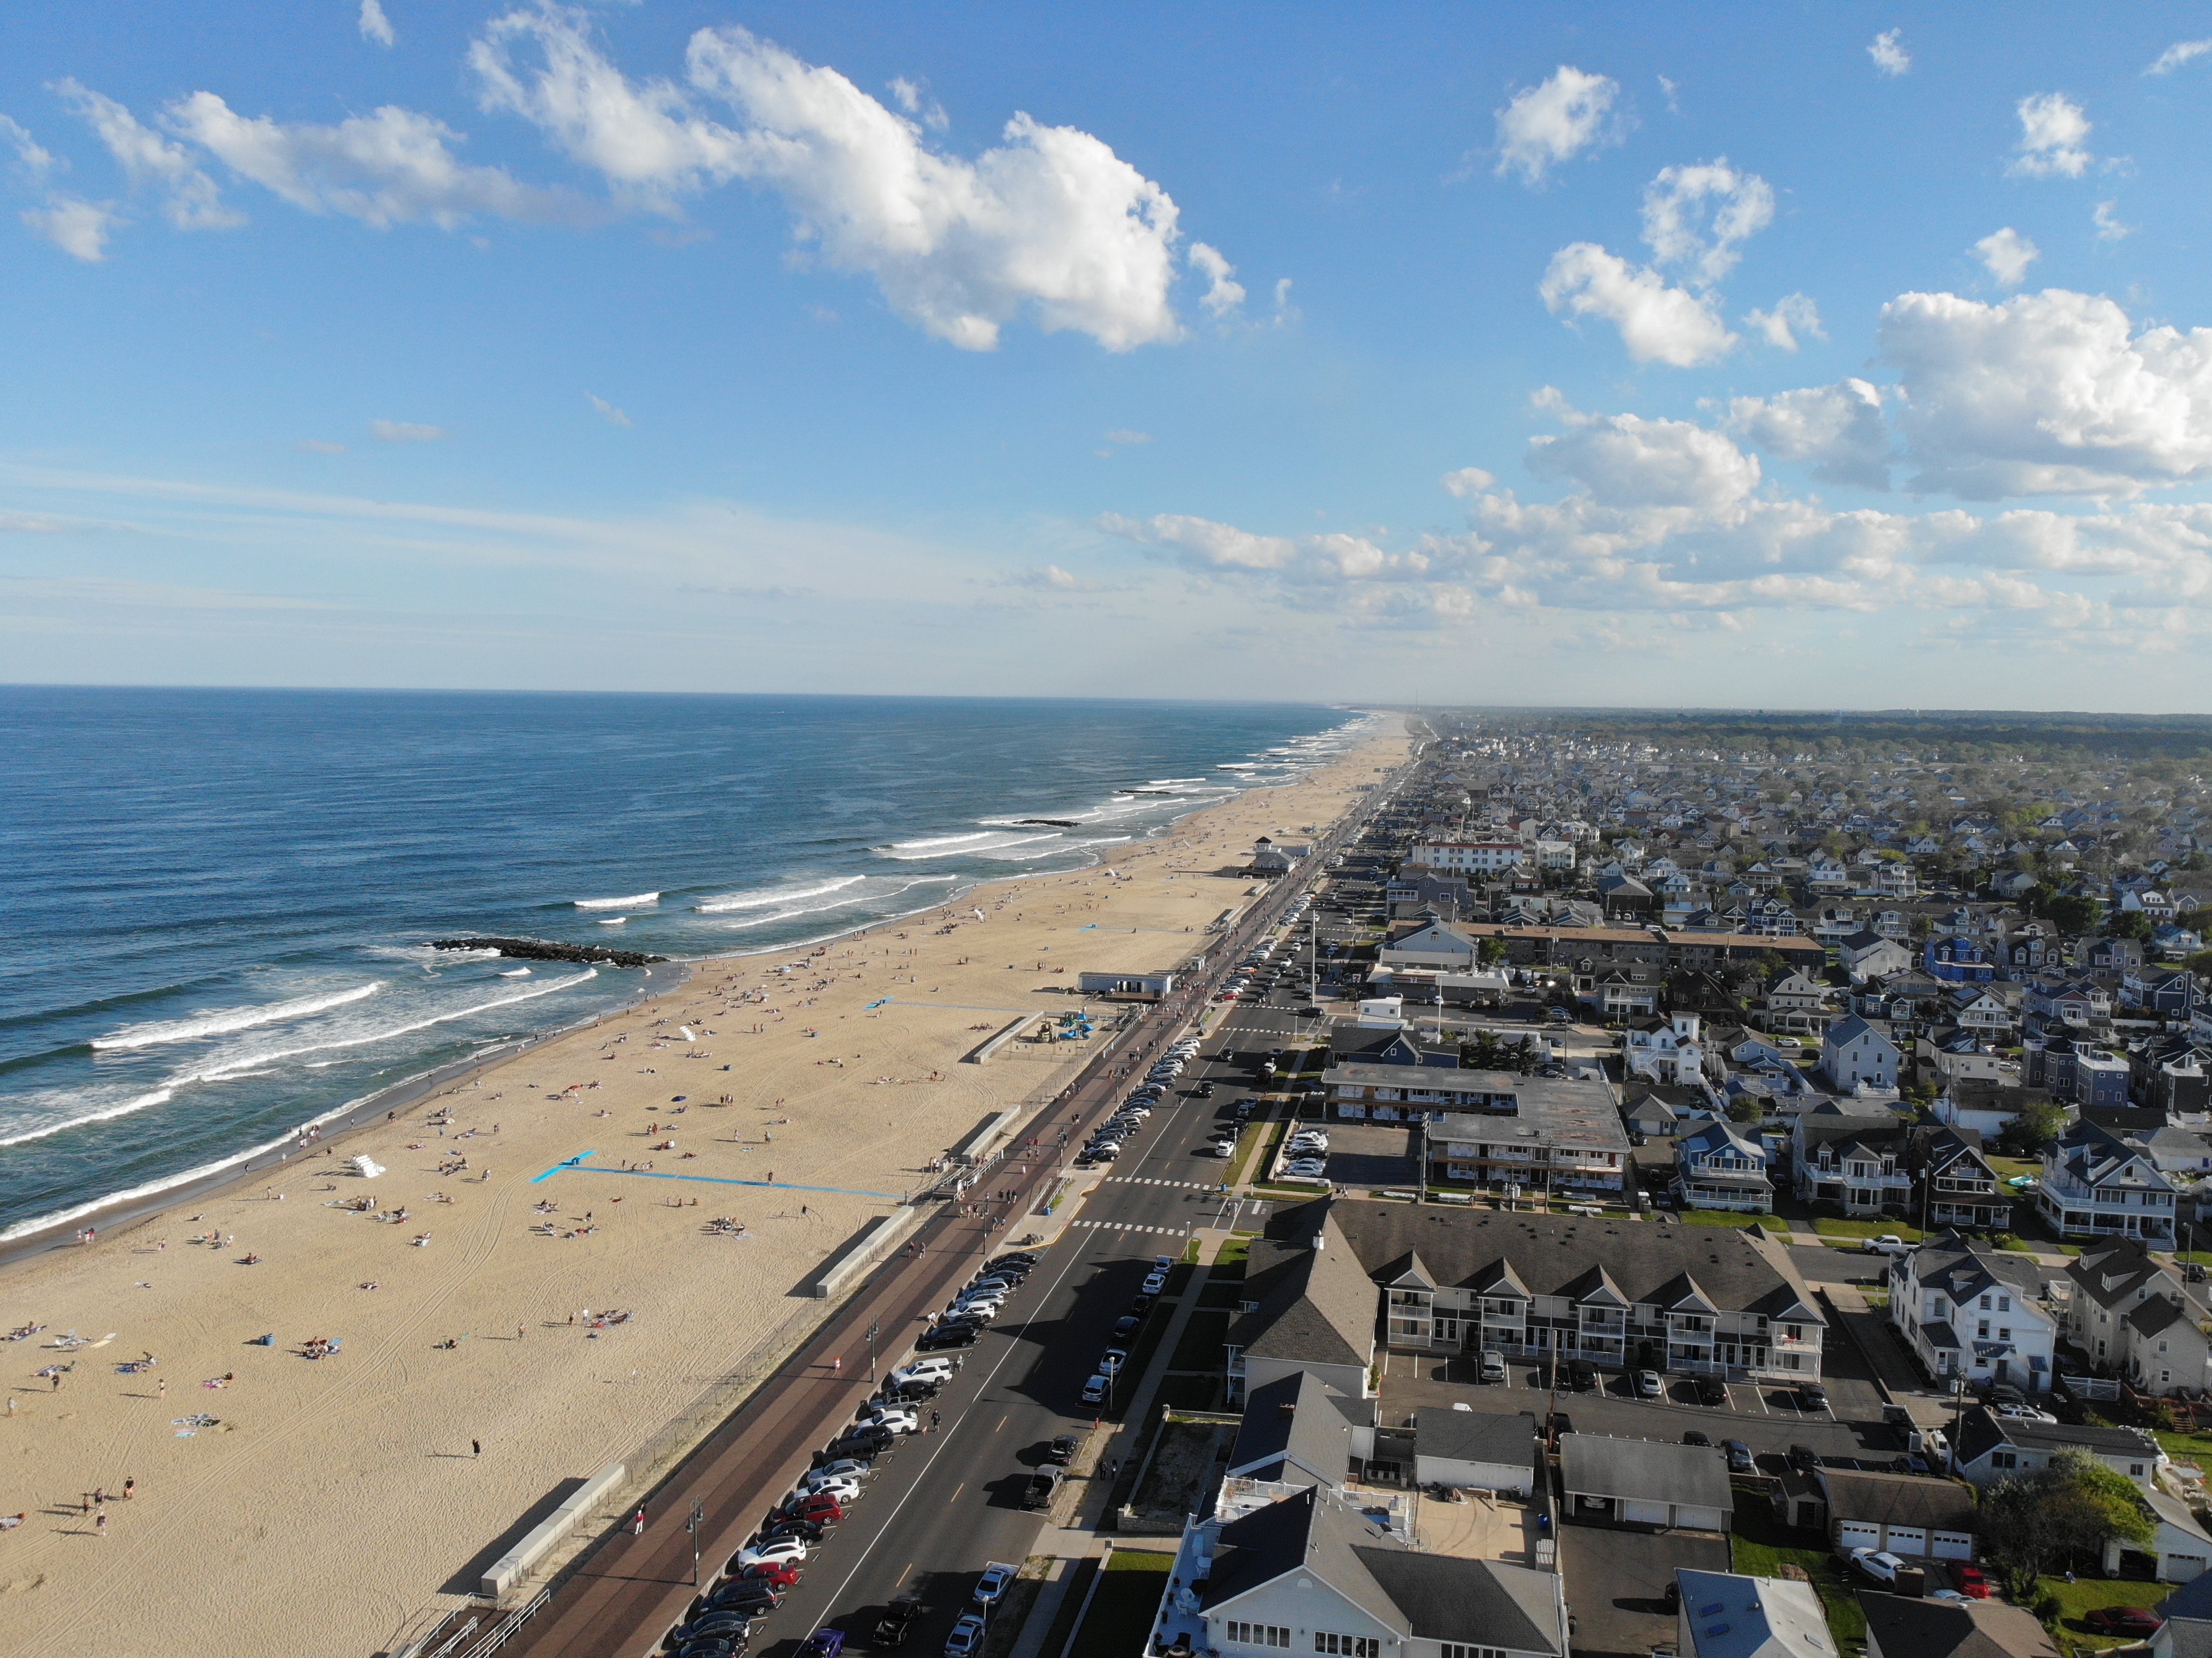 Reopening Rules & Regulations - The Borough of Belmar New Jersey